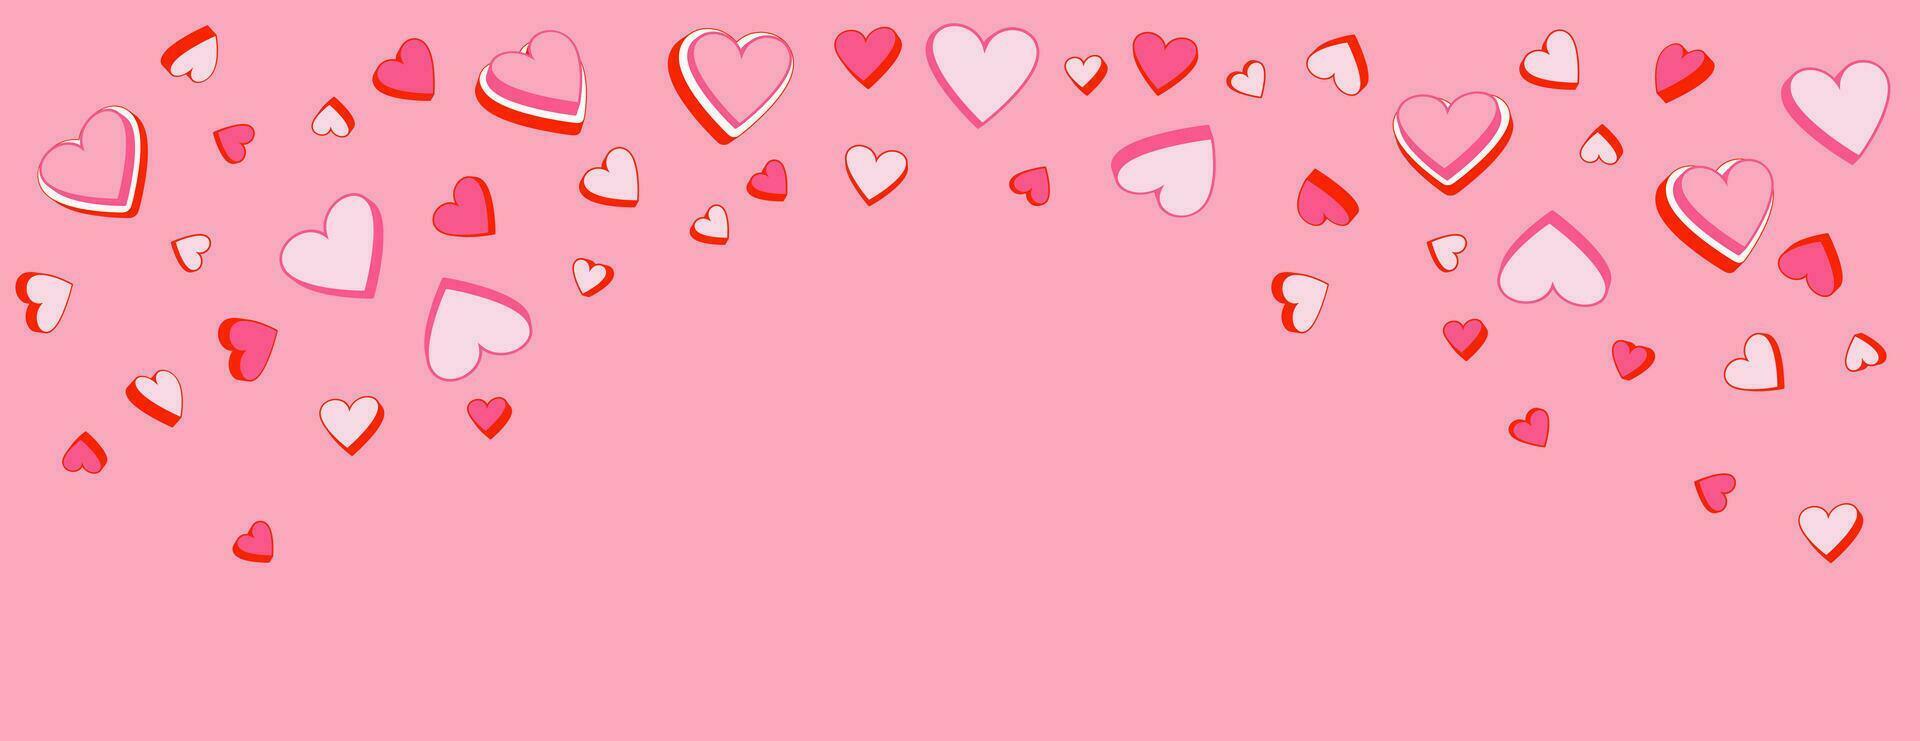 Colorful banner with hearts. Horizontal border with copy space. Vector illustration stylized cute cartoon retro hearts. Suitable for email header, post in social networks, advertising, events